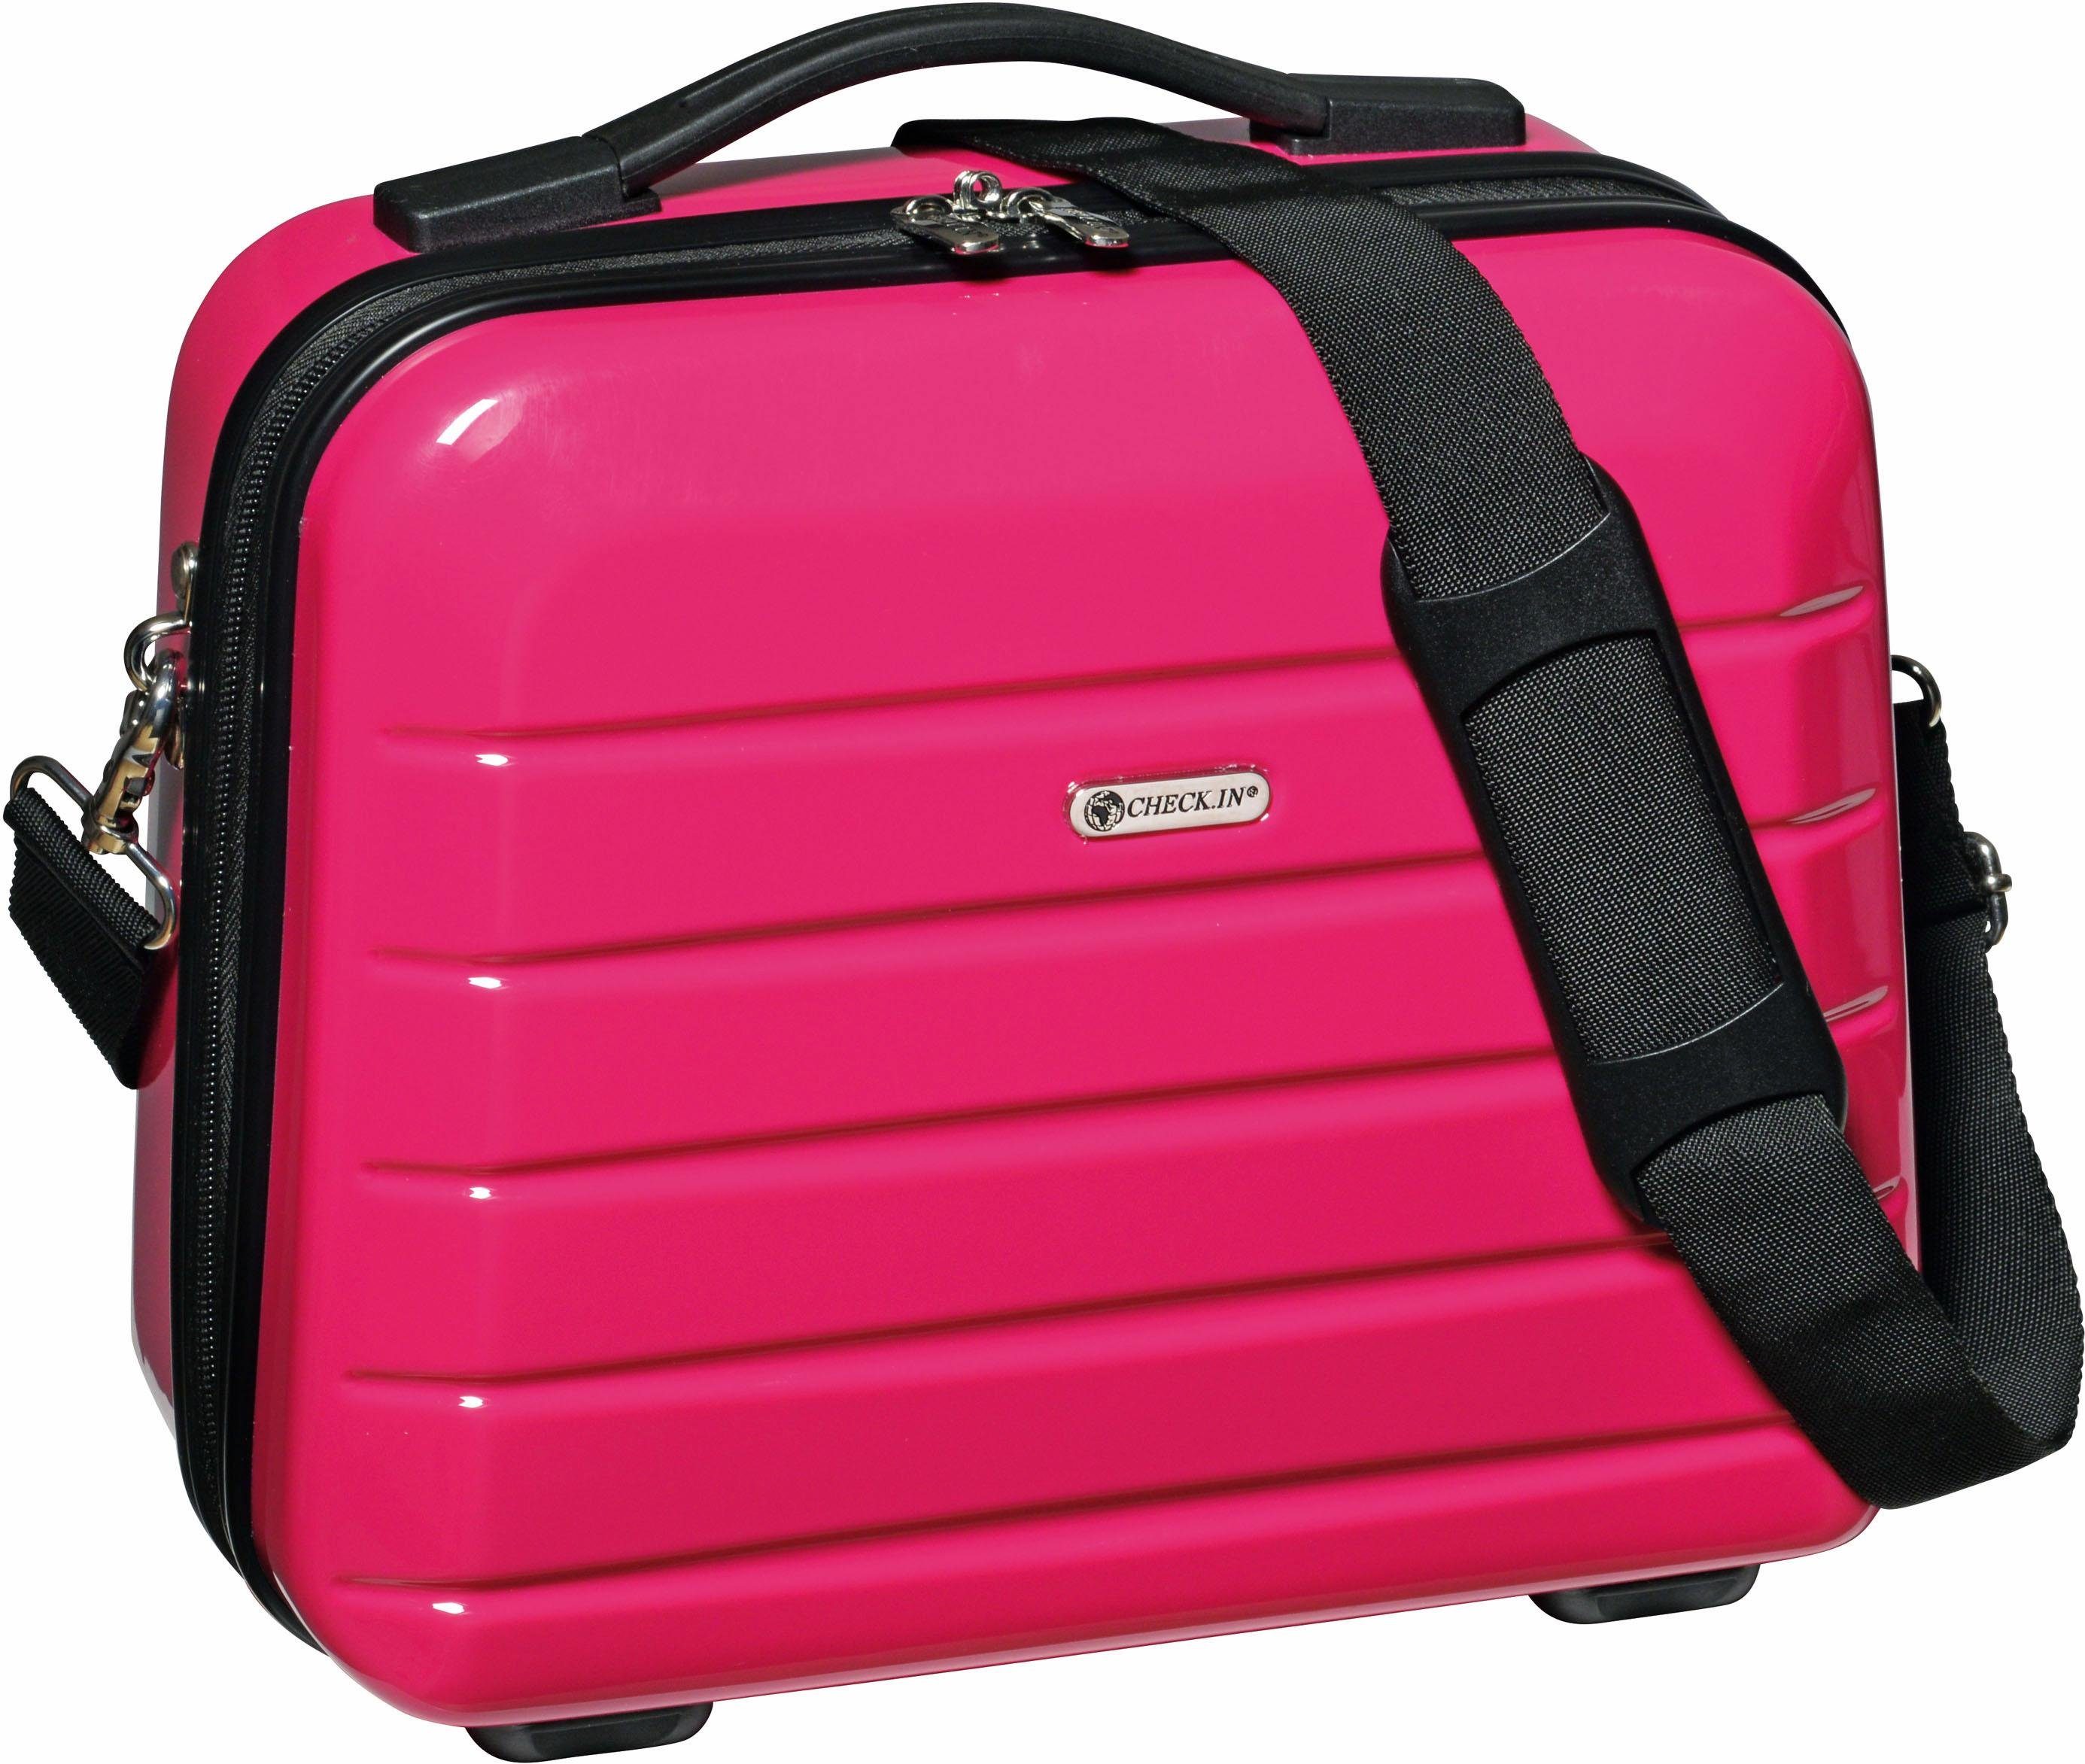 CHECK.IN® Beautycase London 2.0 pink